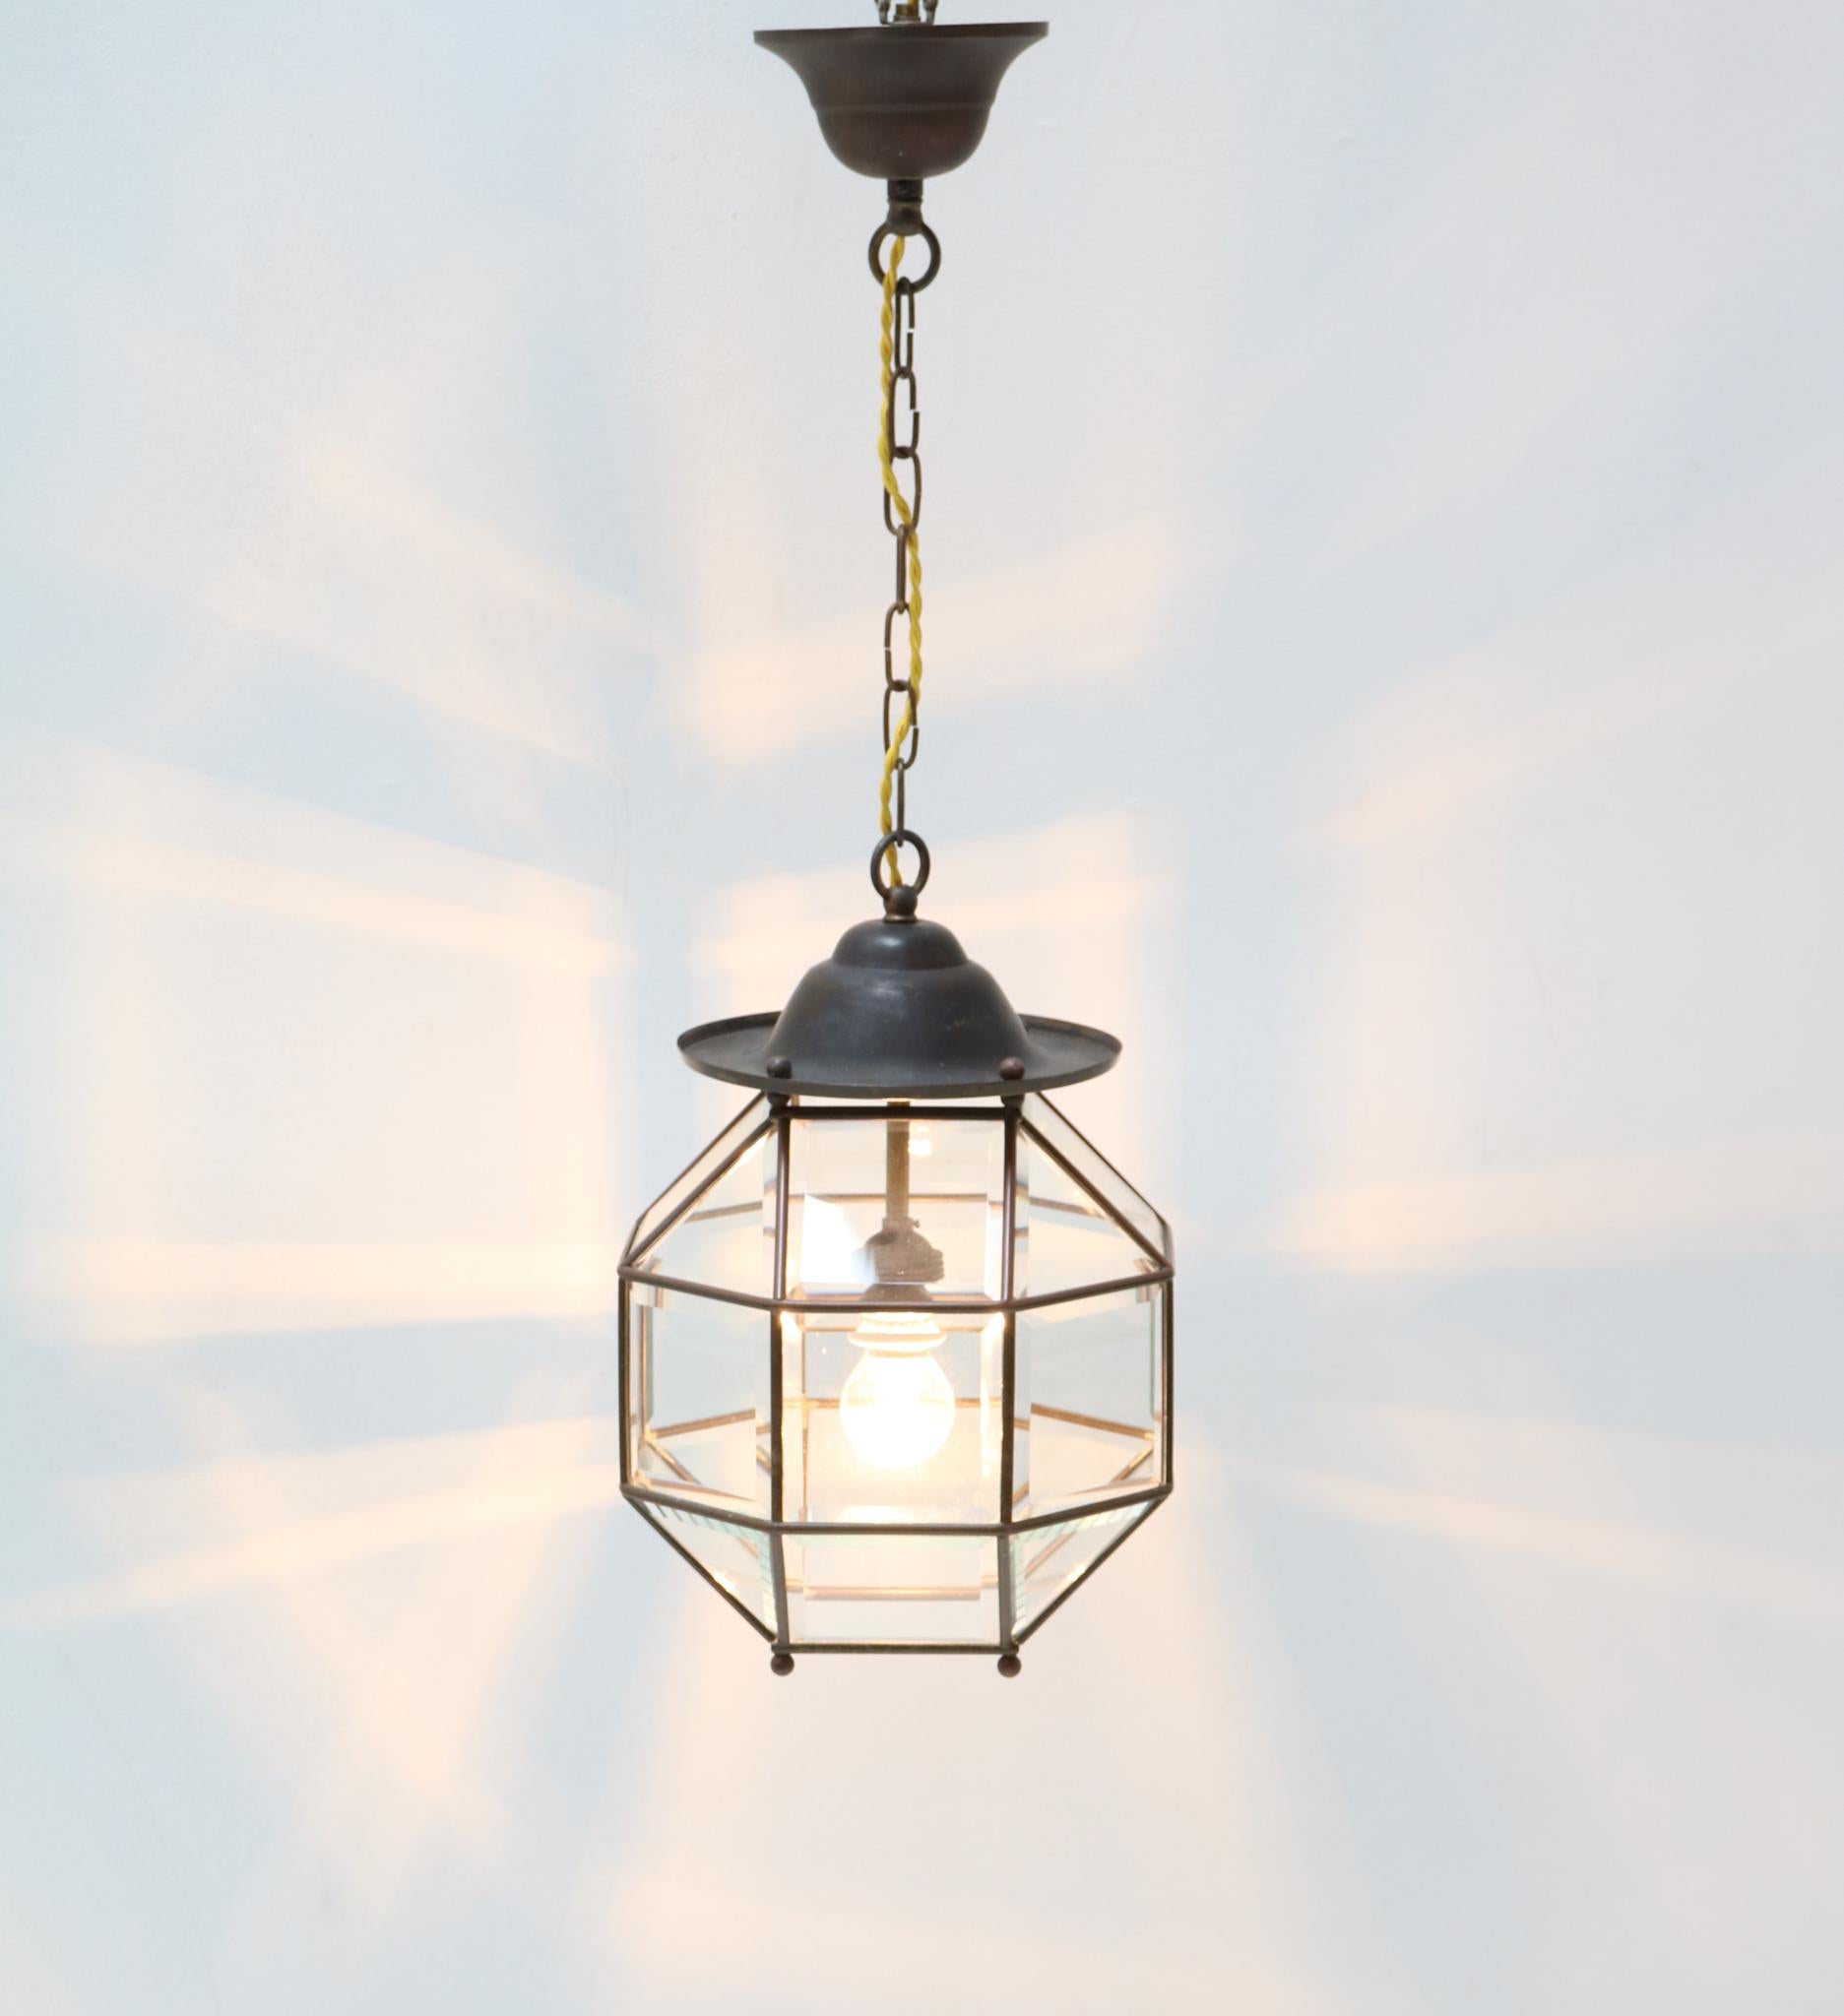 Stunning Art Deco lantern.
Striking Dutch design from the 1920s.
Patinated brass frame with original beveled glass.
Rewired with one socket for E-27 light bulb.
In very good condition with a beautiful patina.